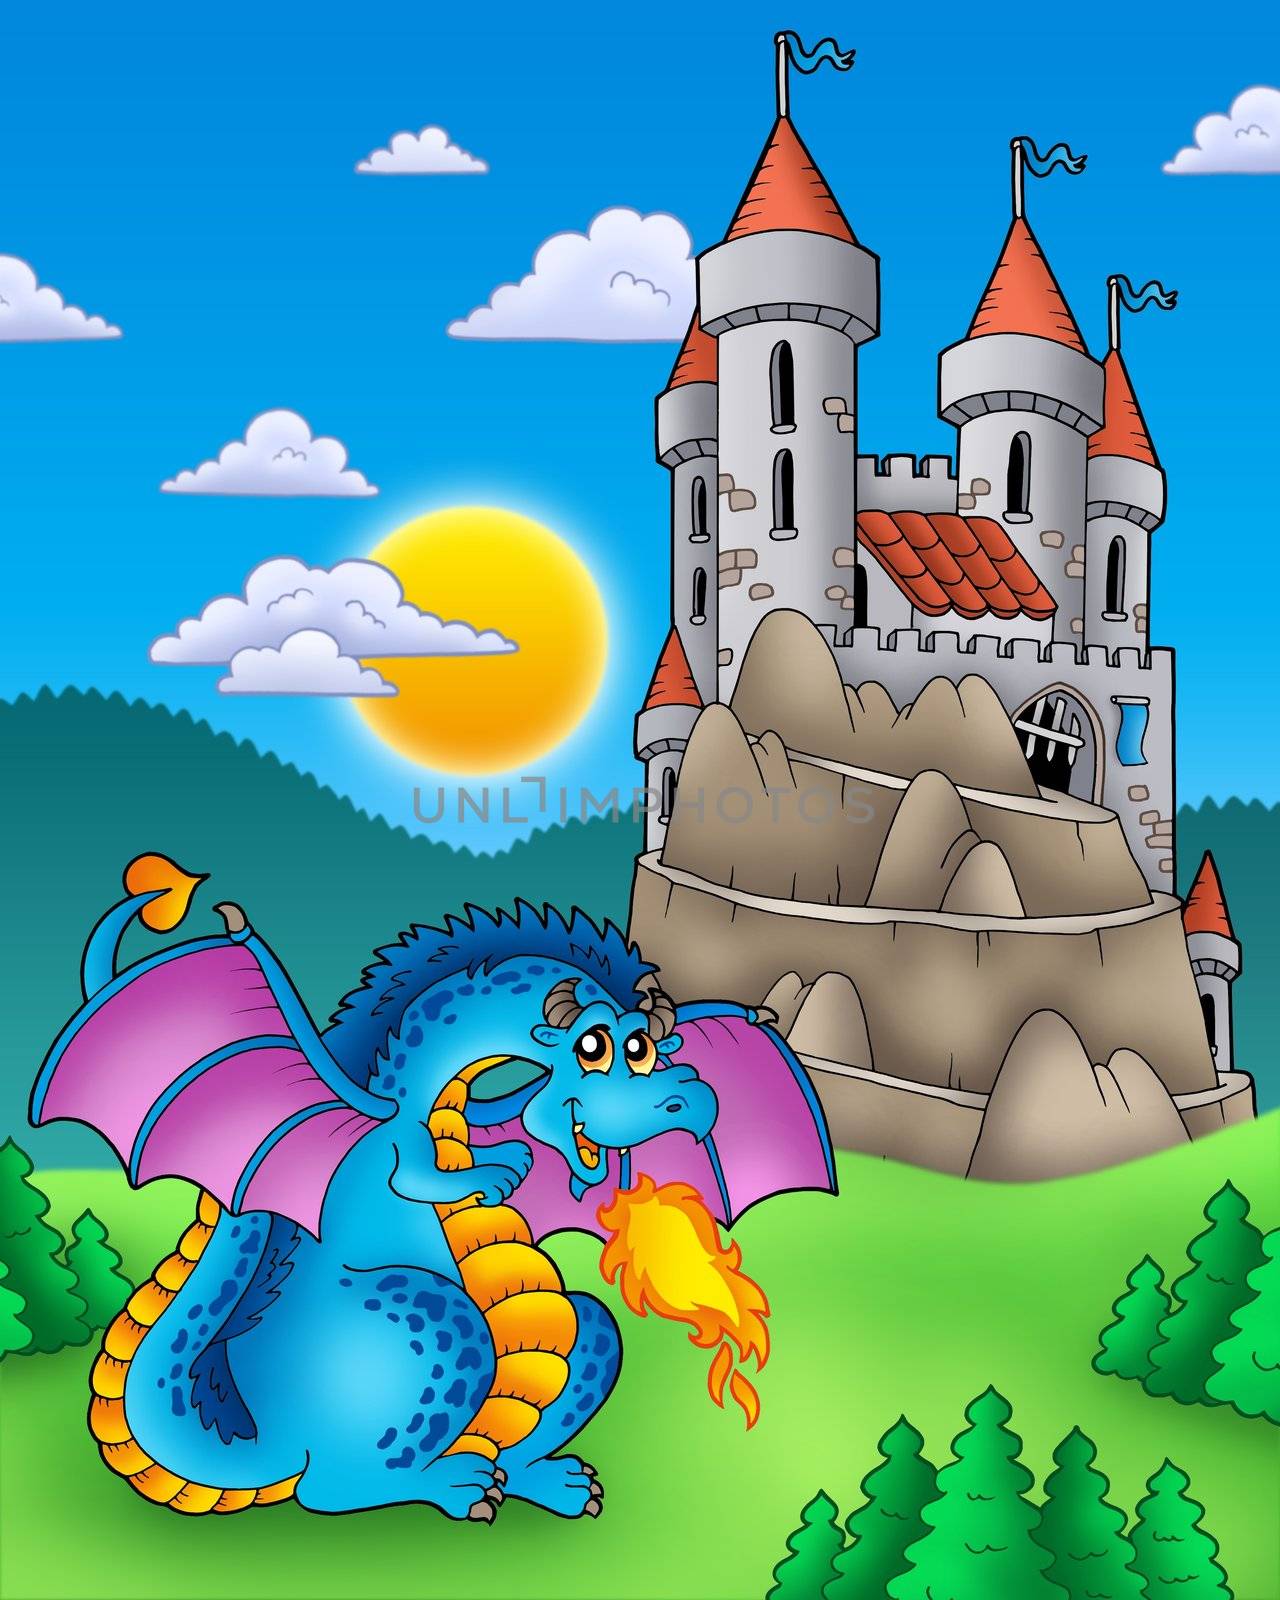 Blue dragon with castle on hill by clairev